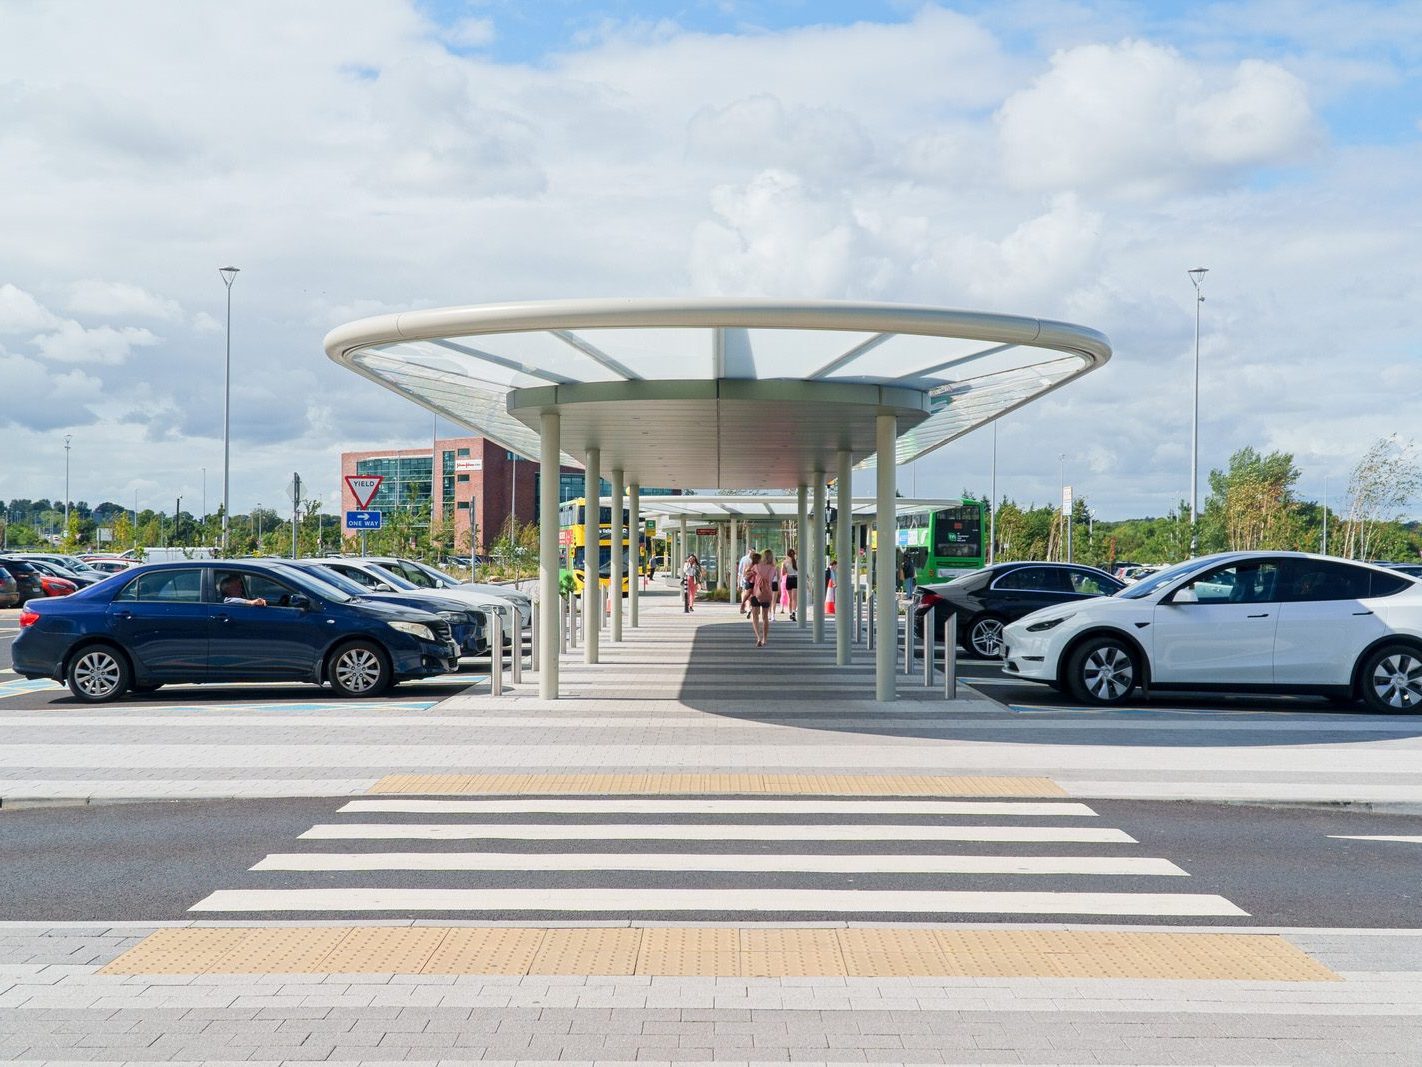 THE NEW BUS PLAZA THAT I DID NOT KNOW ABOUT [AT LIFFEY VALLEY SHOPPING CENTRE] 018